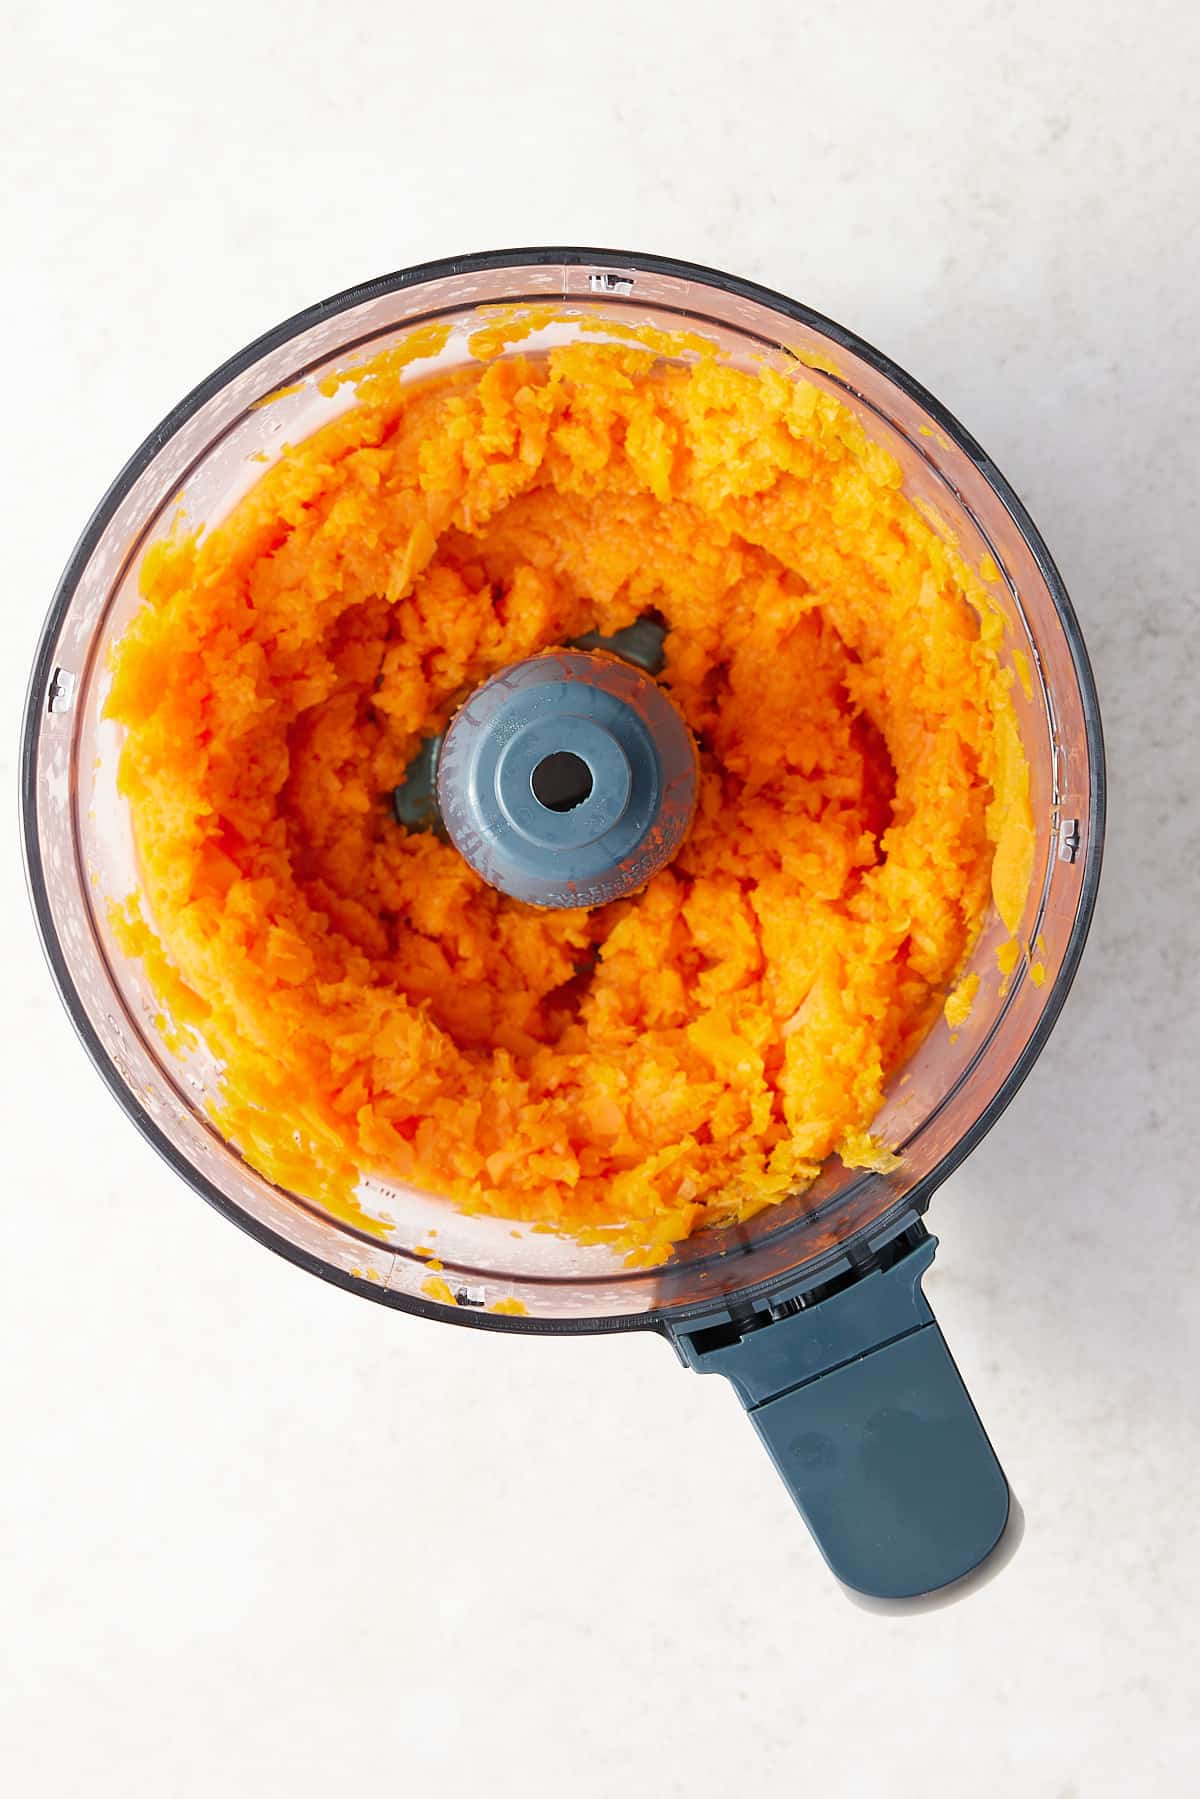 Food processor bowl filled with pureed carrot